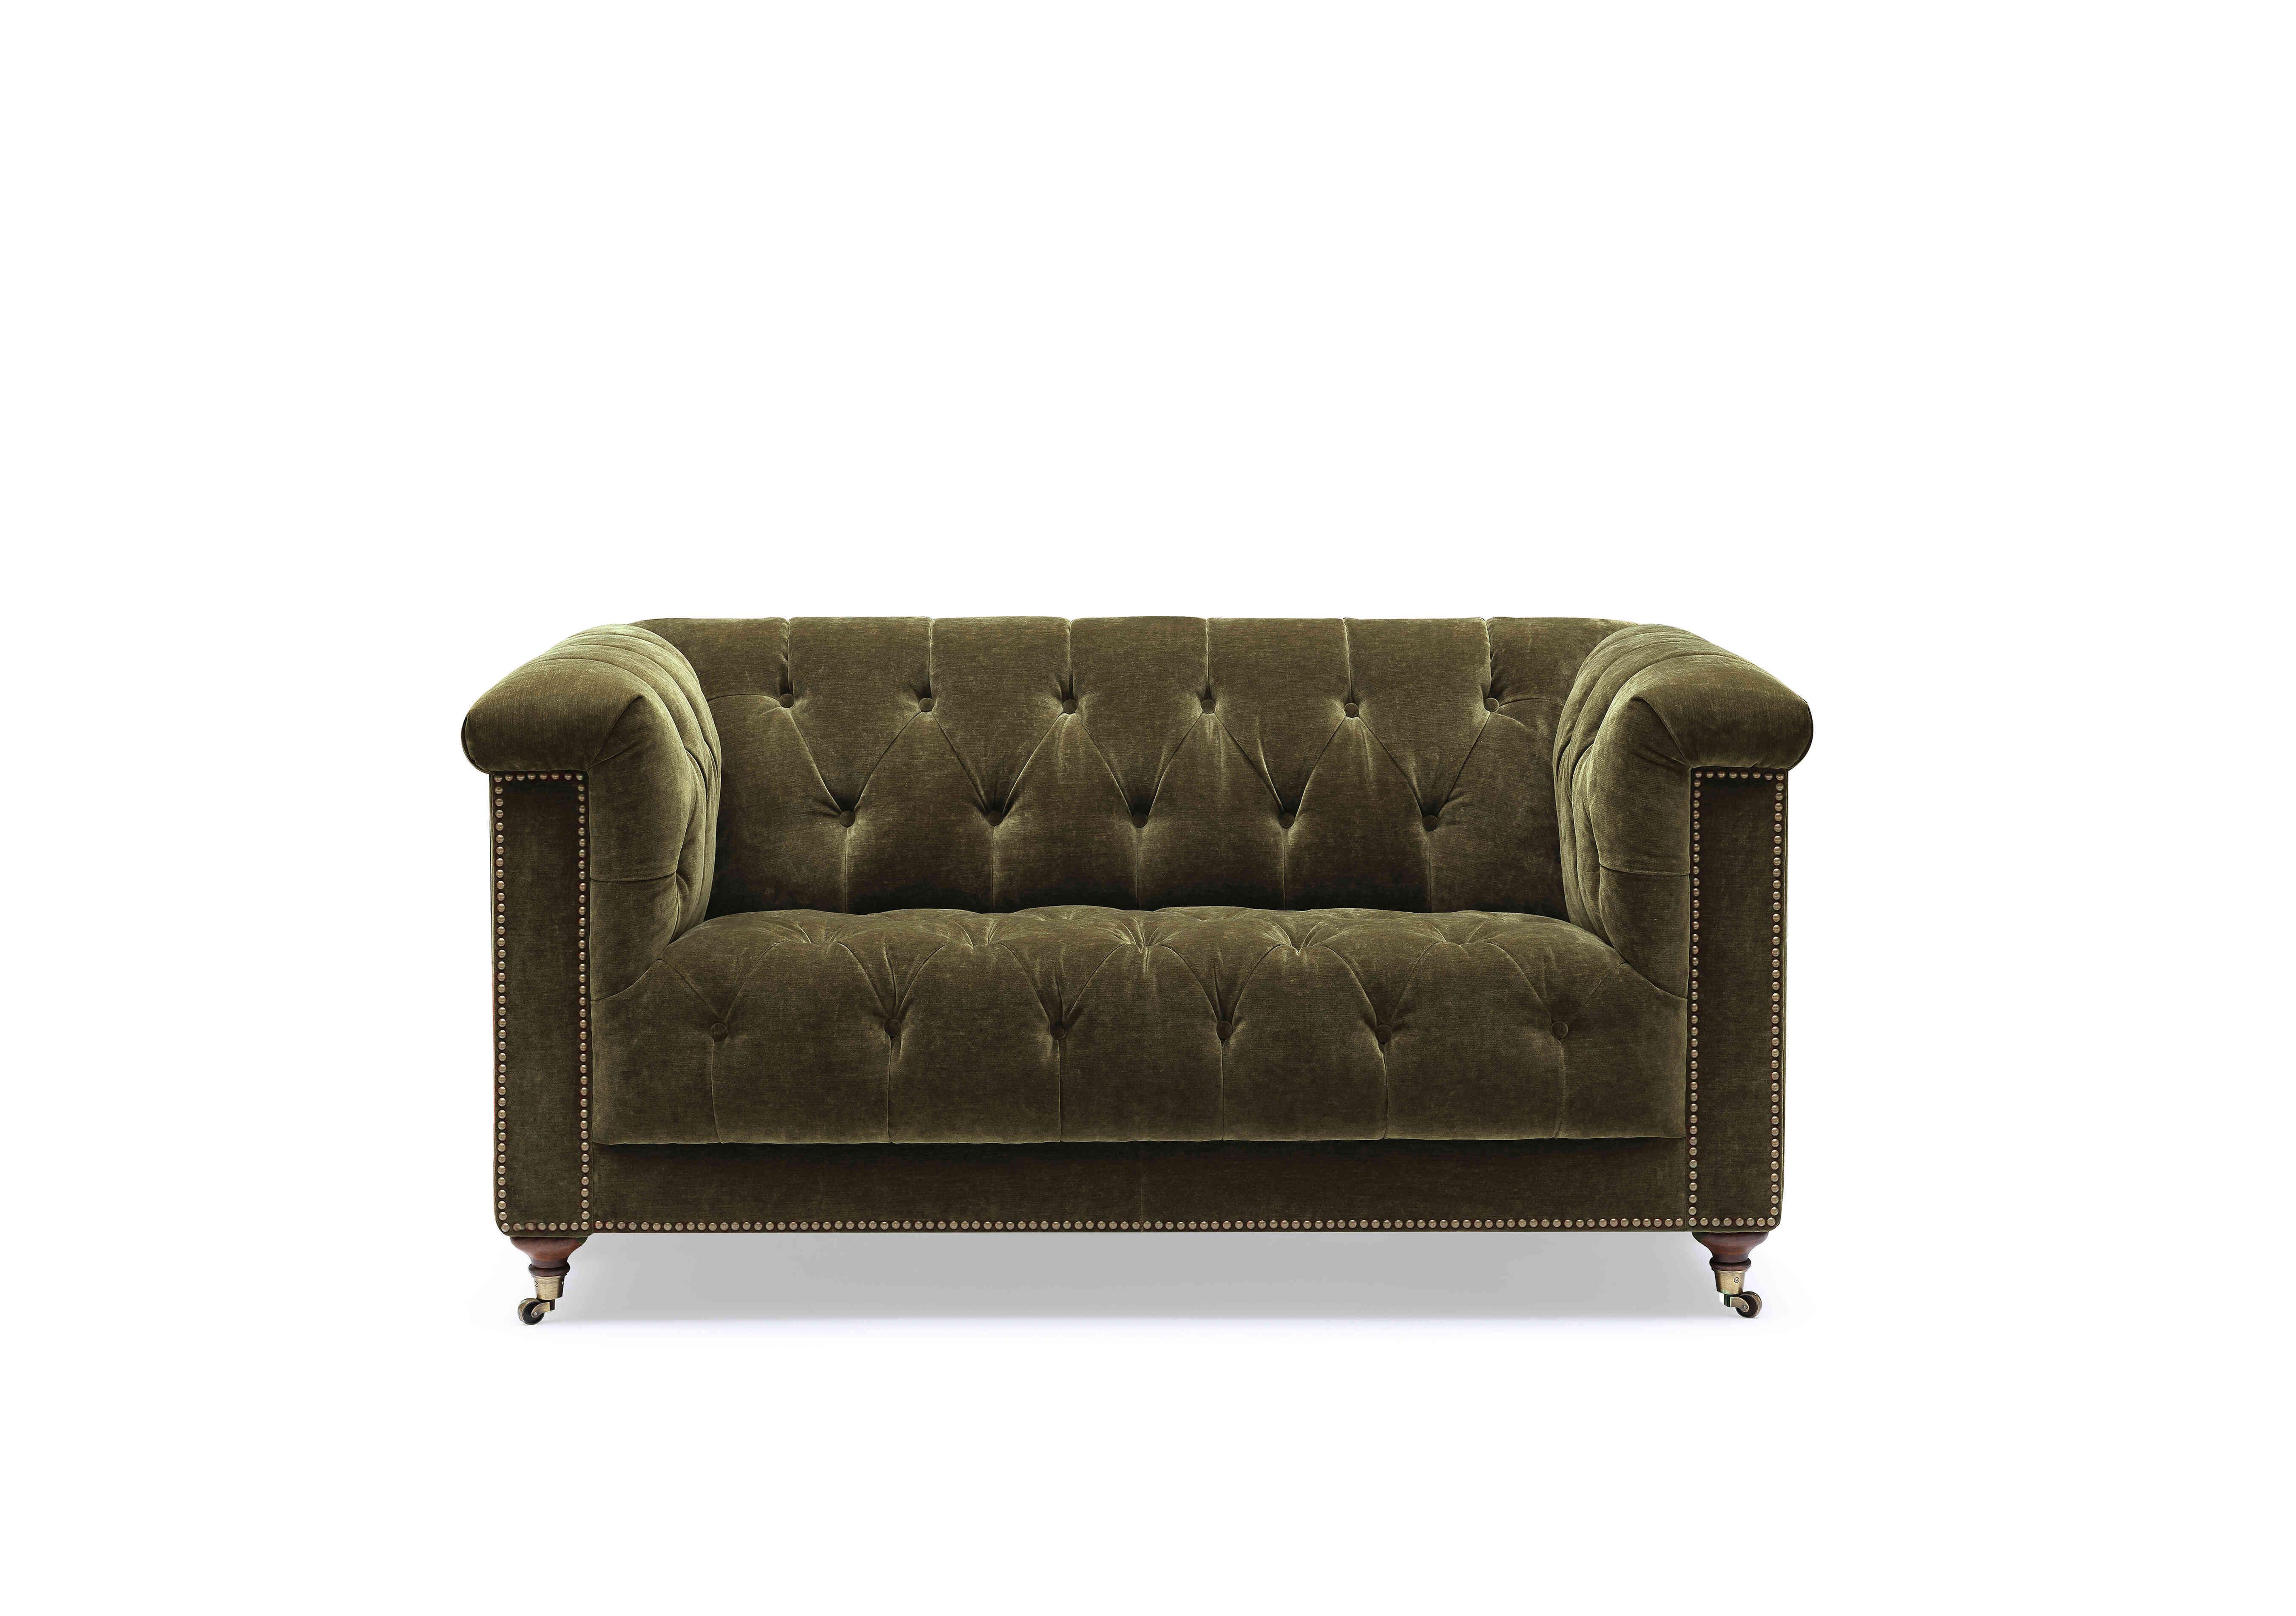 Wallace 2 Seater Fabric Chesterfield Sofa in X3y1-W018 Pine on Furniture Village